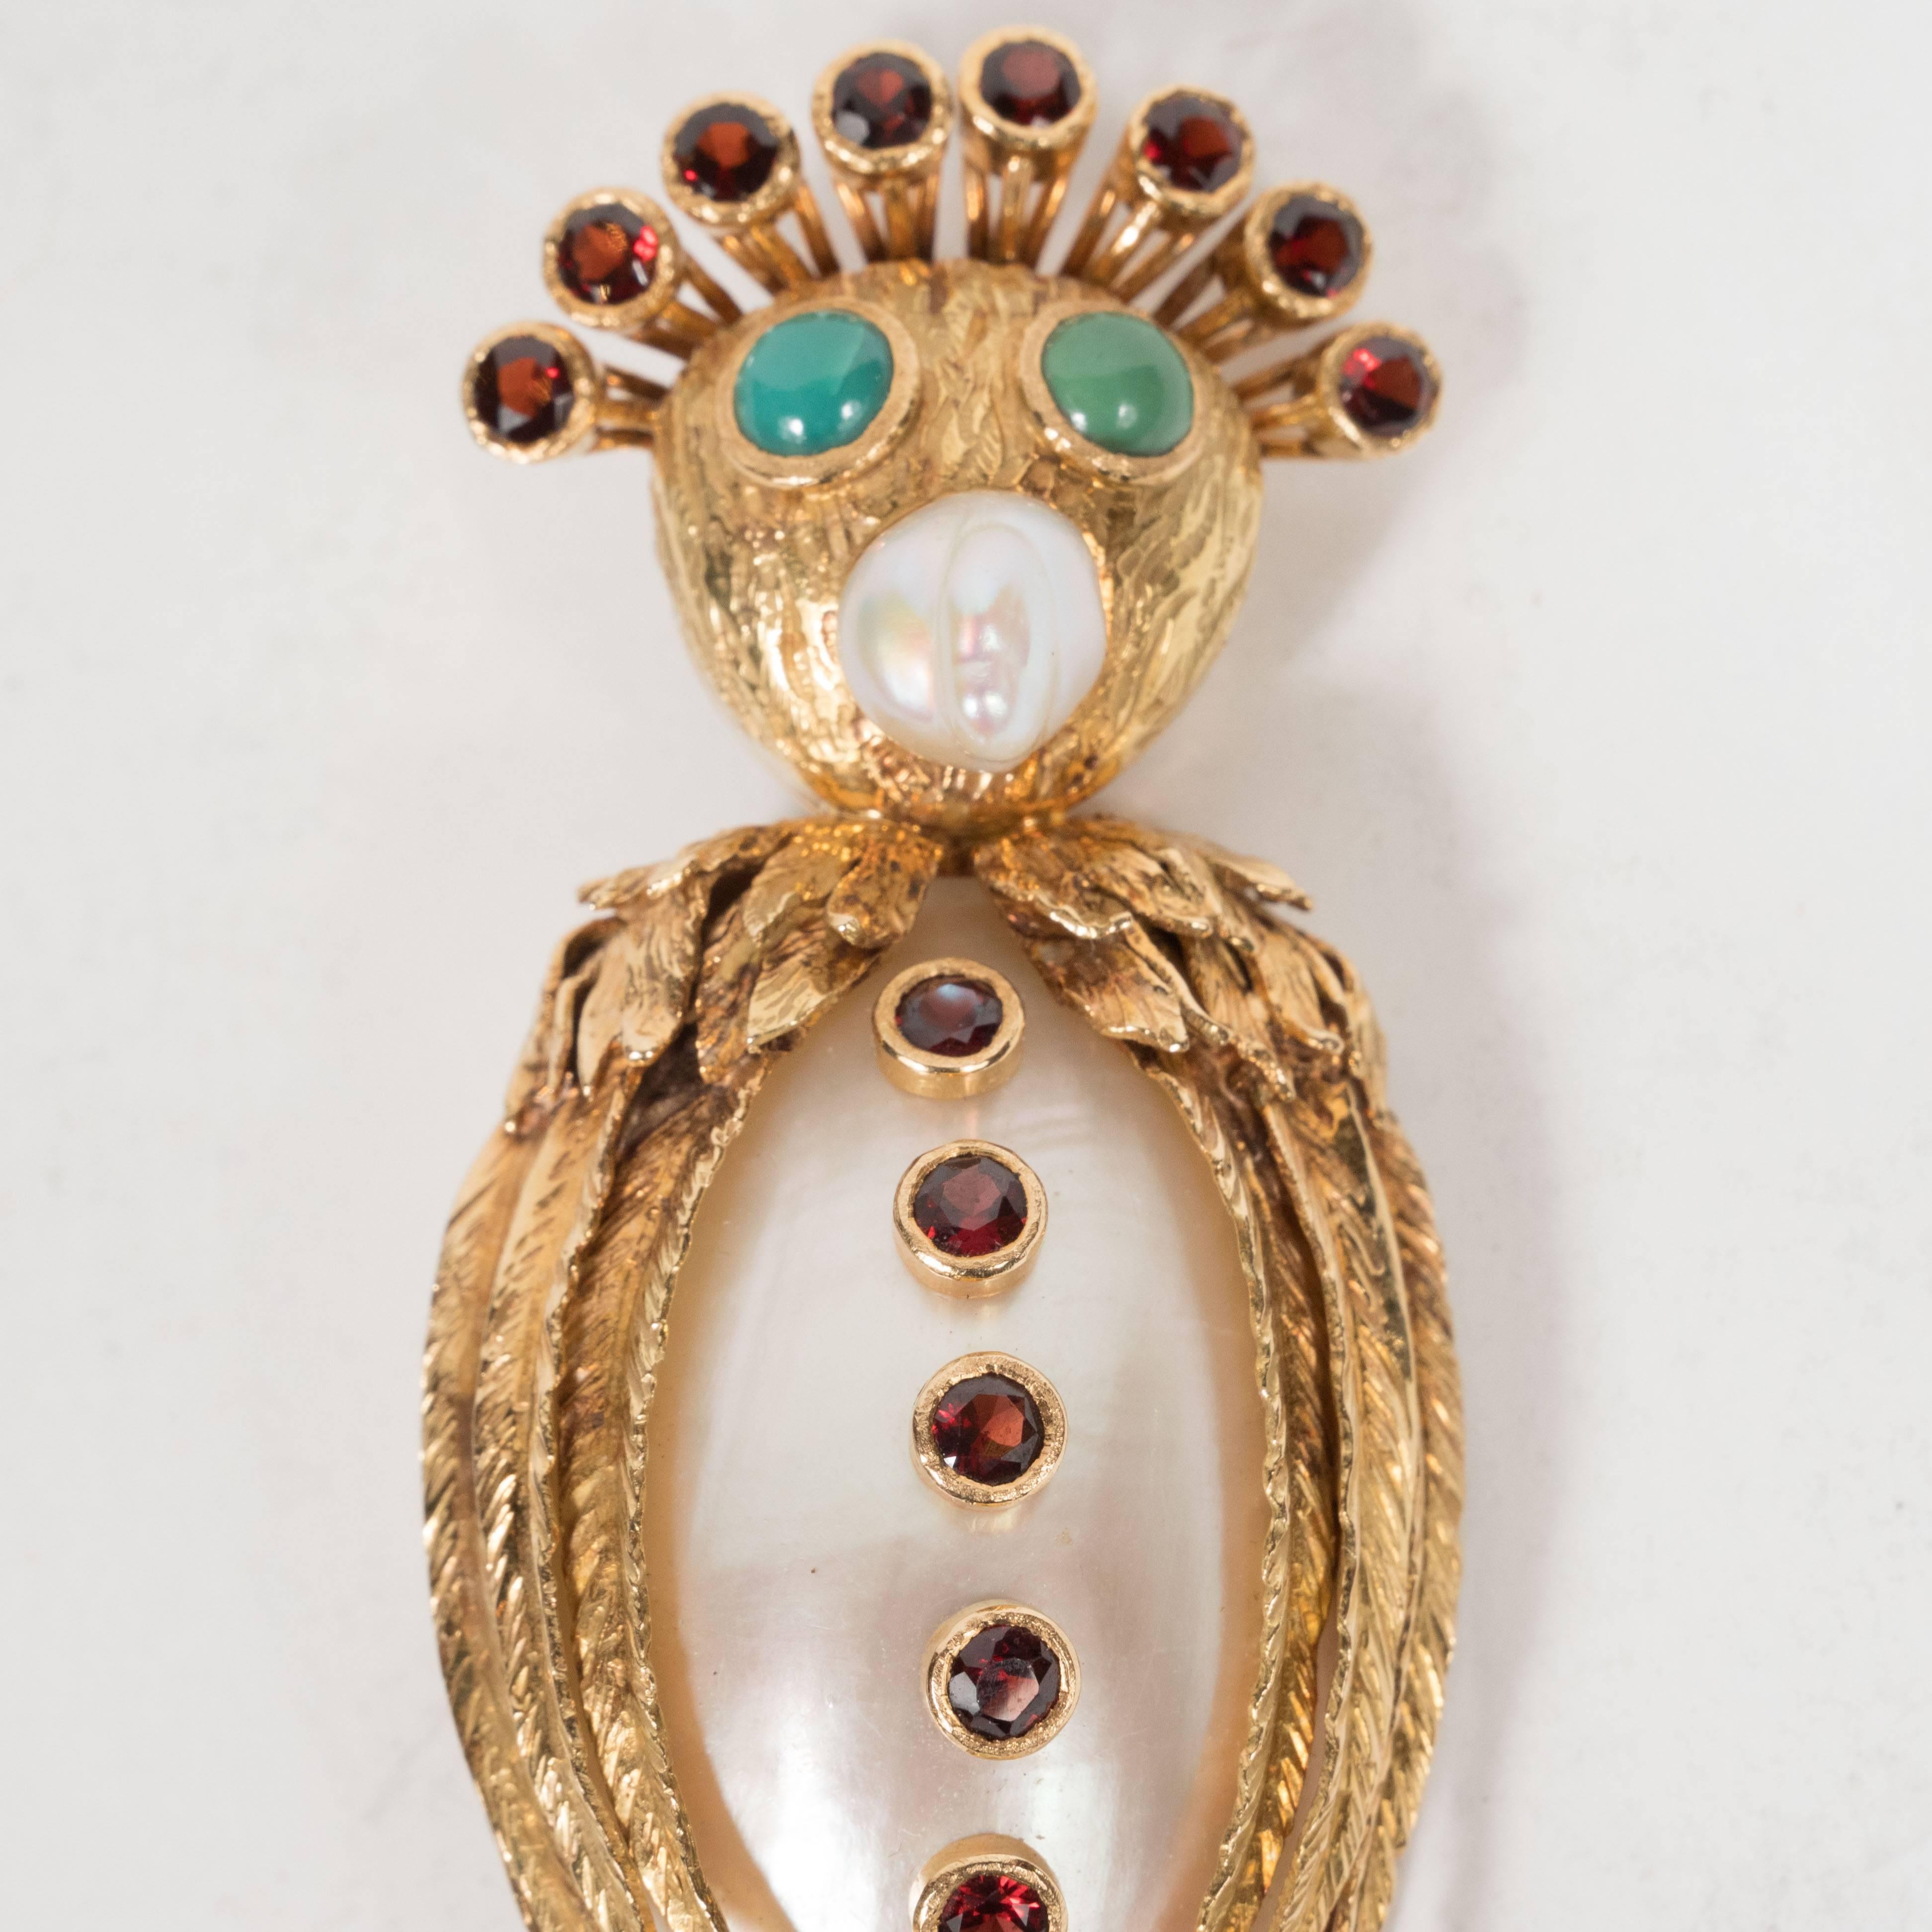 This dazzling and whimsical owl brooch features a nacreous mollusk body adorned with six campari hued garnet 